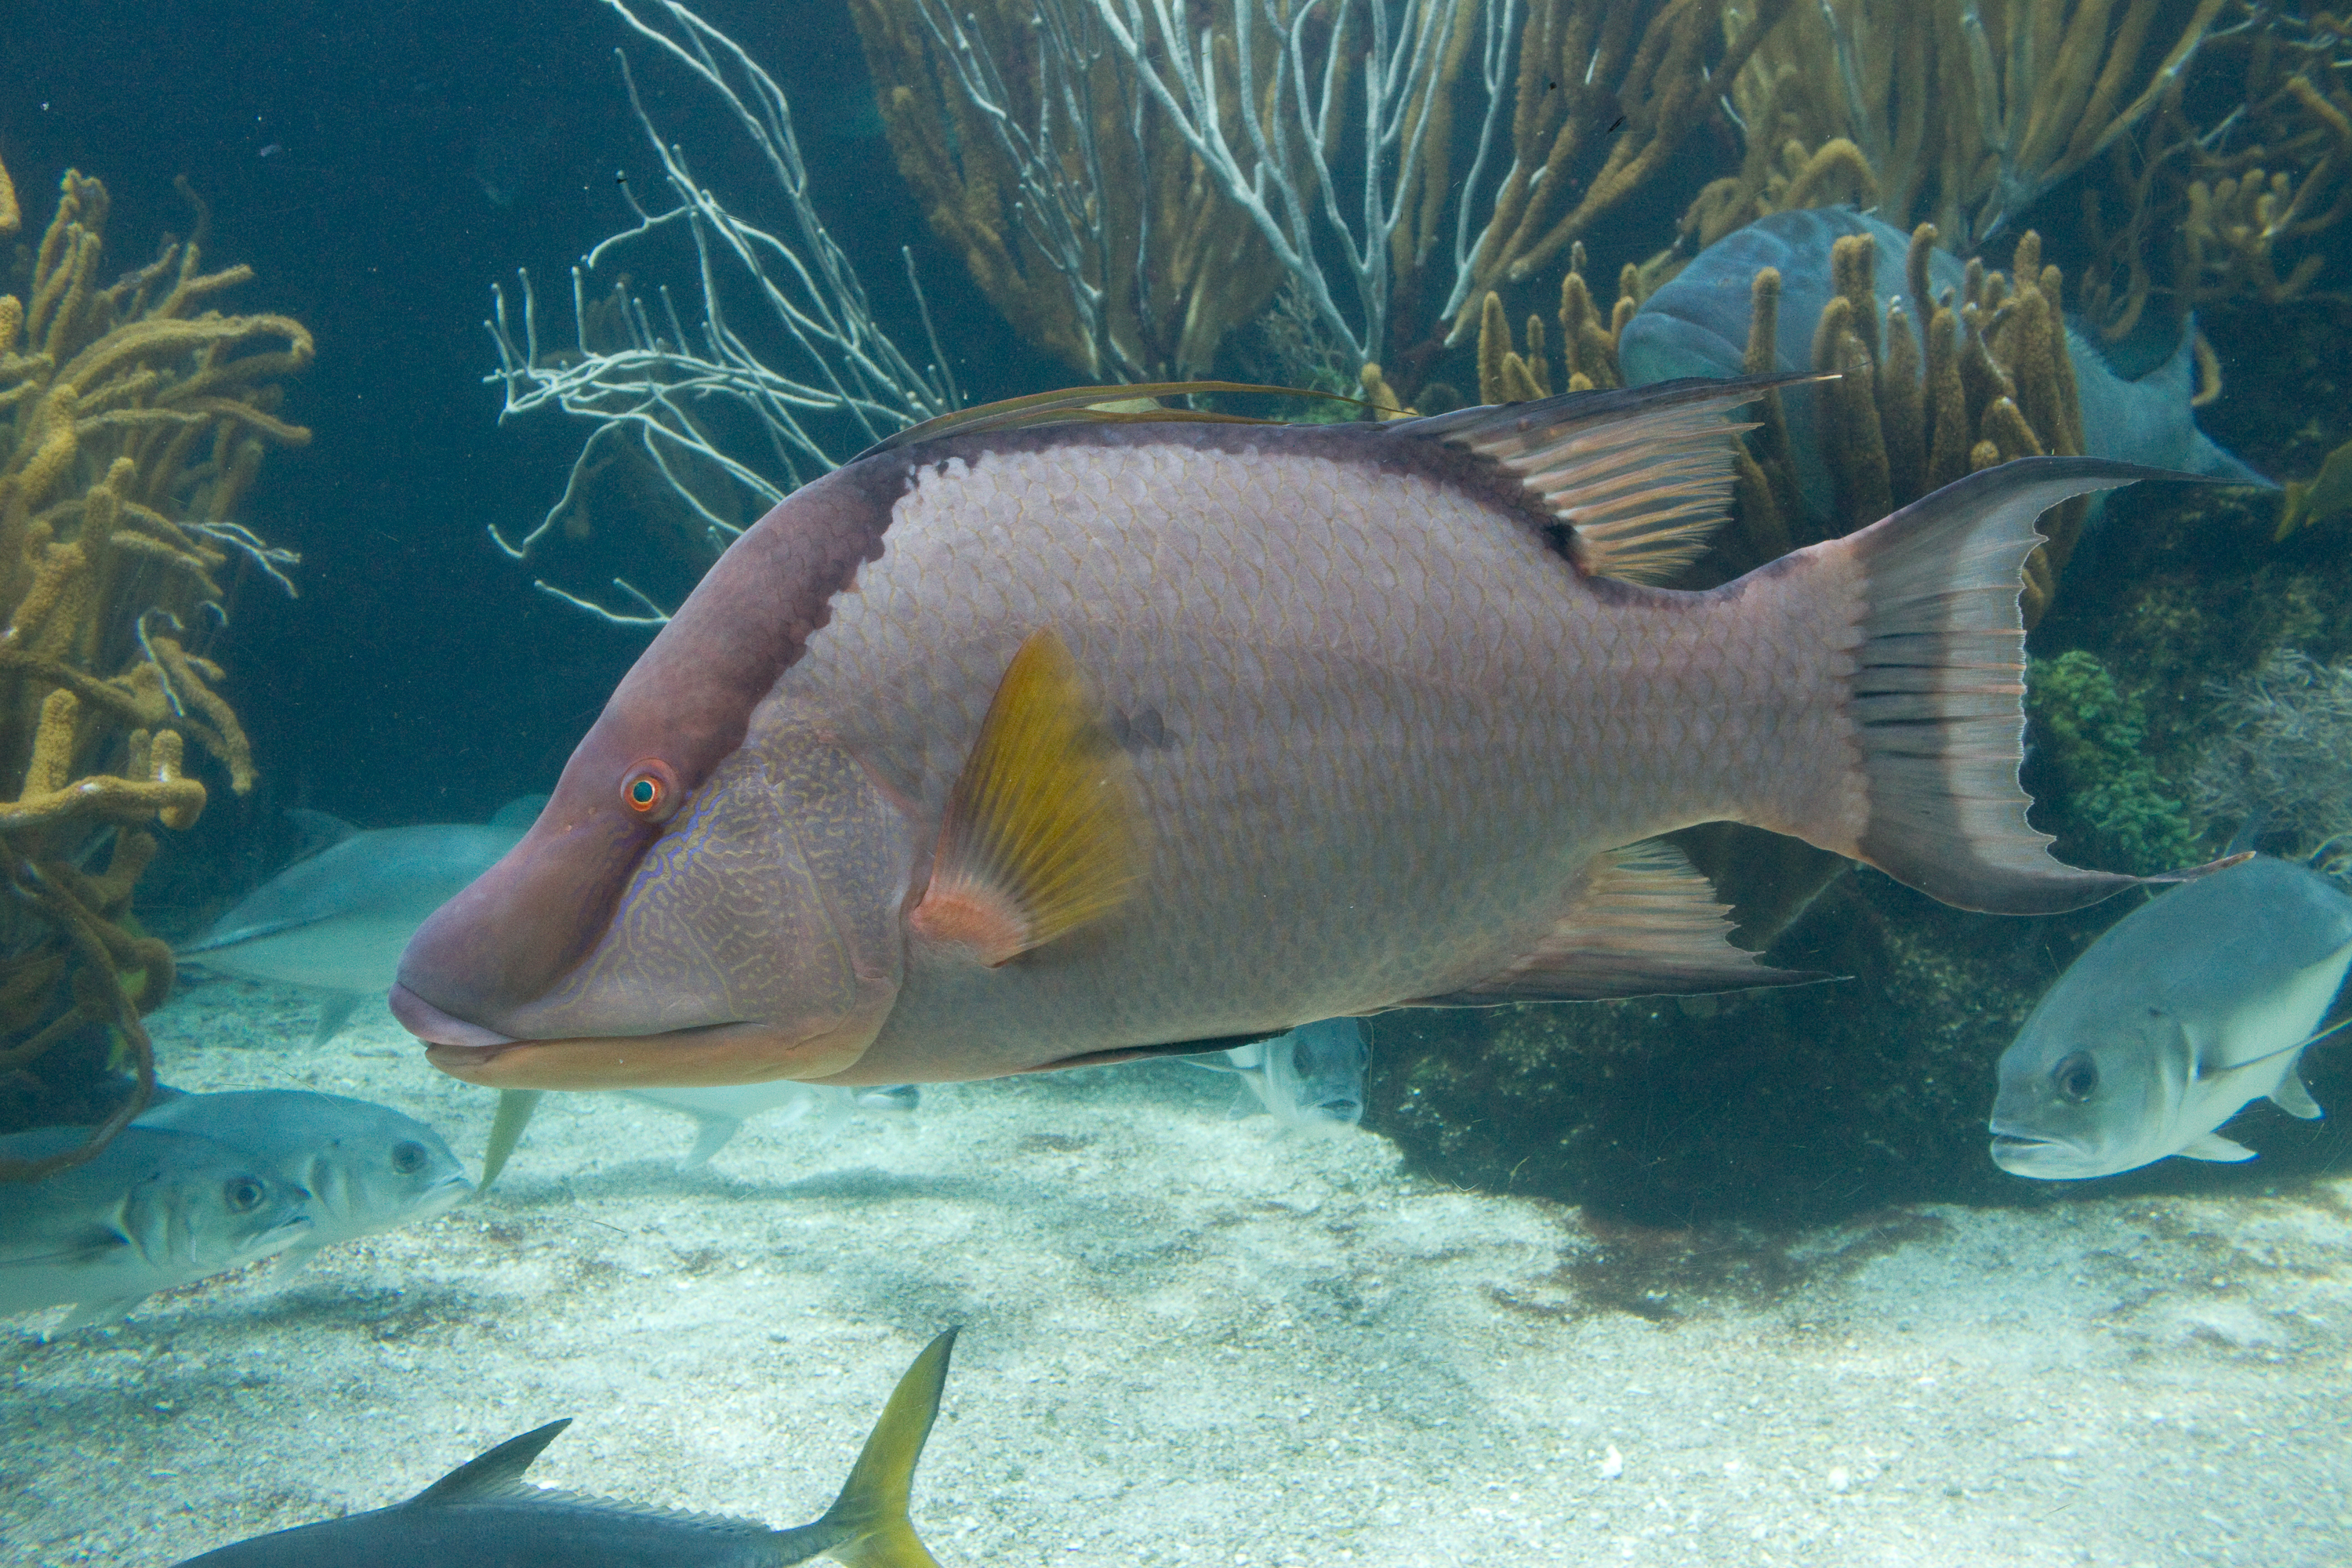 Image of great hogfish